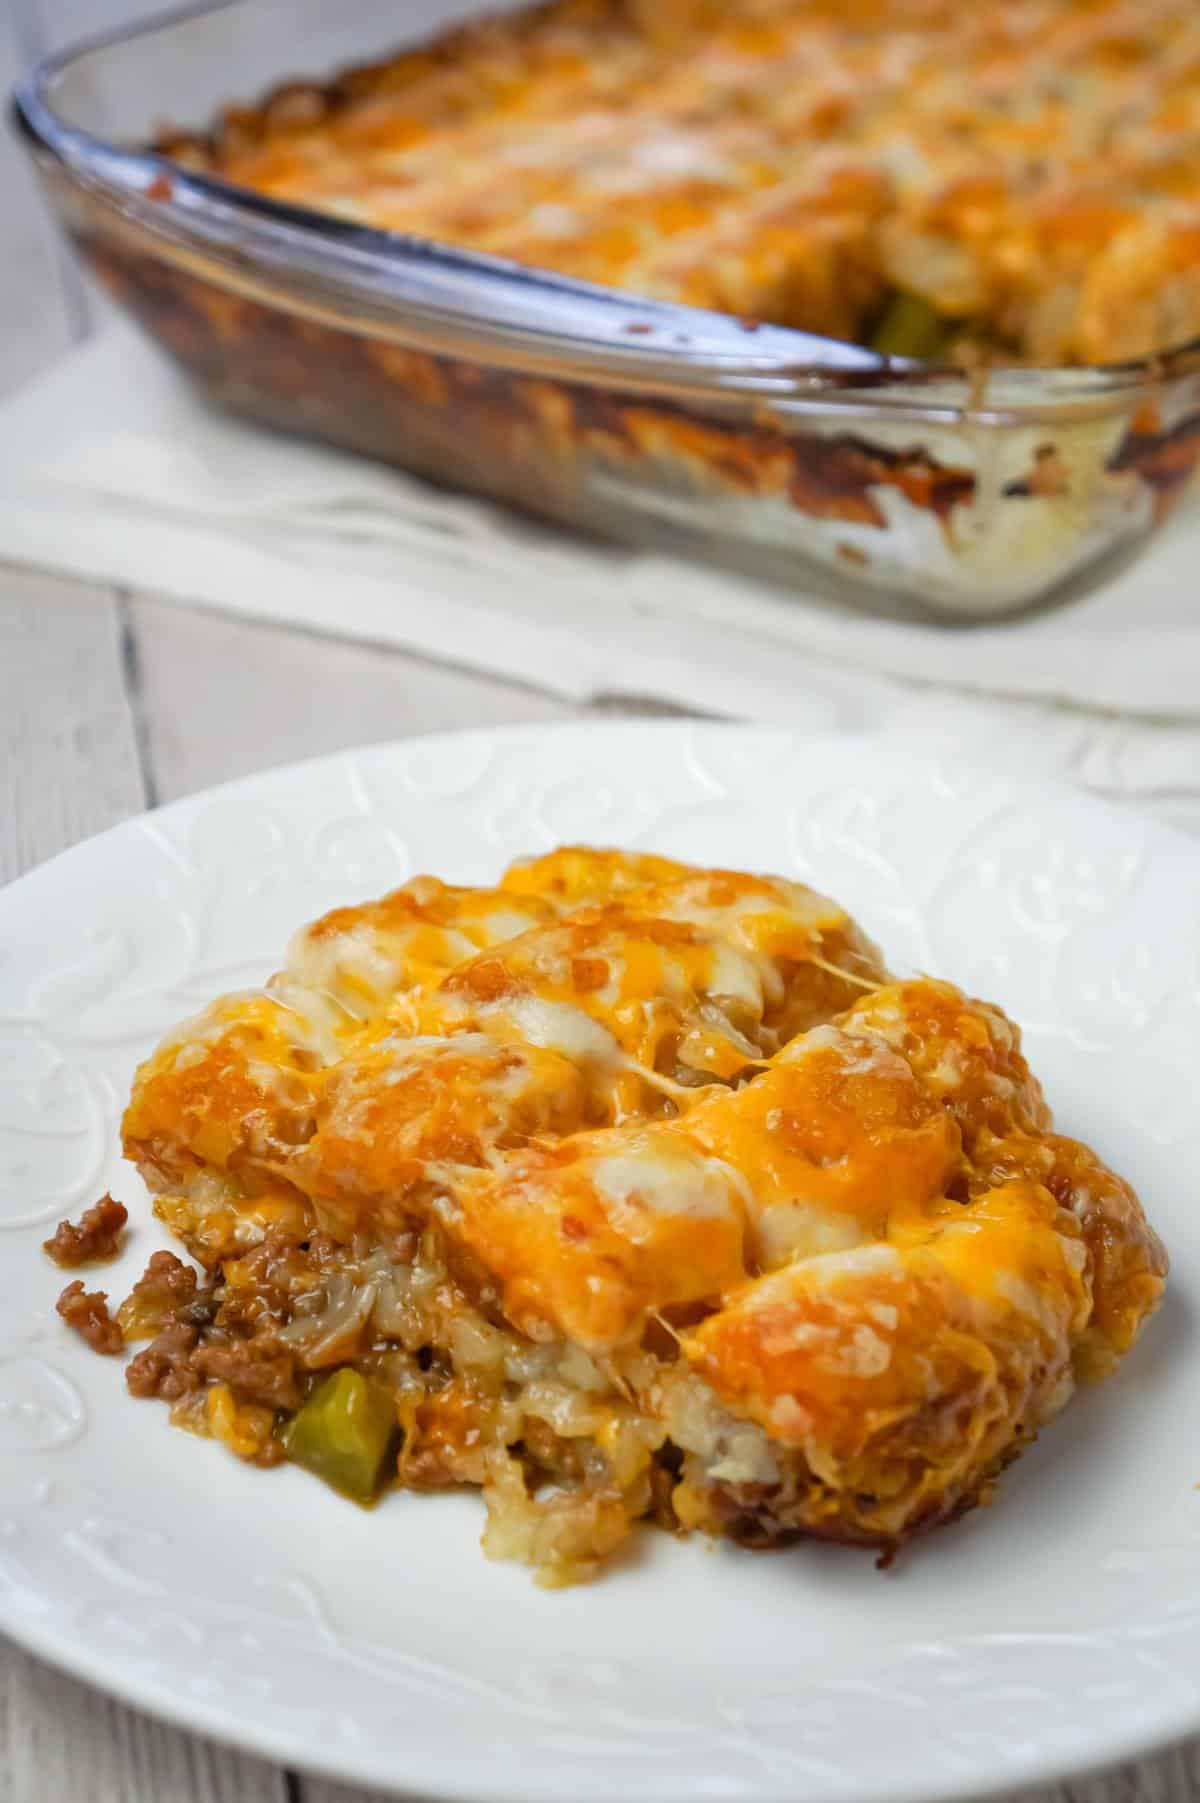 Philly Cheese Steak Tater Tot Casserole is a hearty dinner recipe with a base of ground beef, diced onion, diced green peppers and sliced mushrooms tossed in brown gravy and topped with shredded cheese and tater tots.